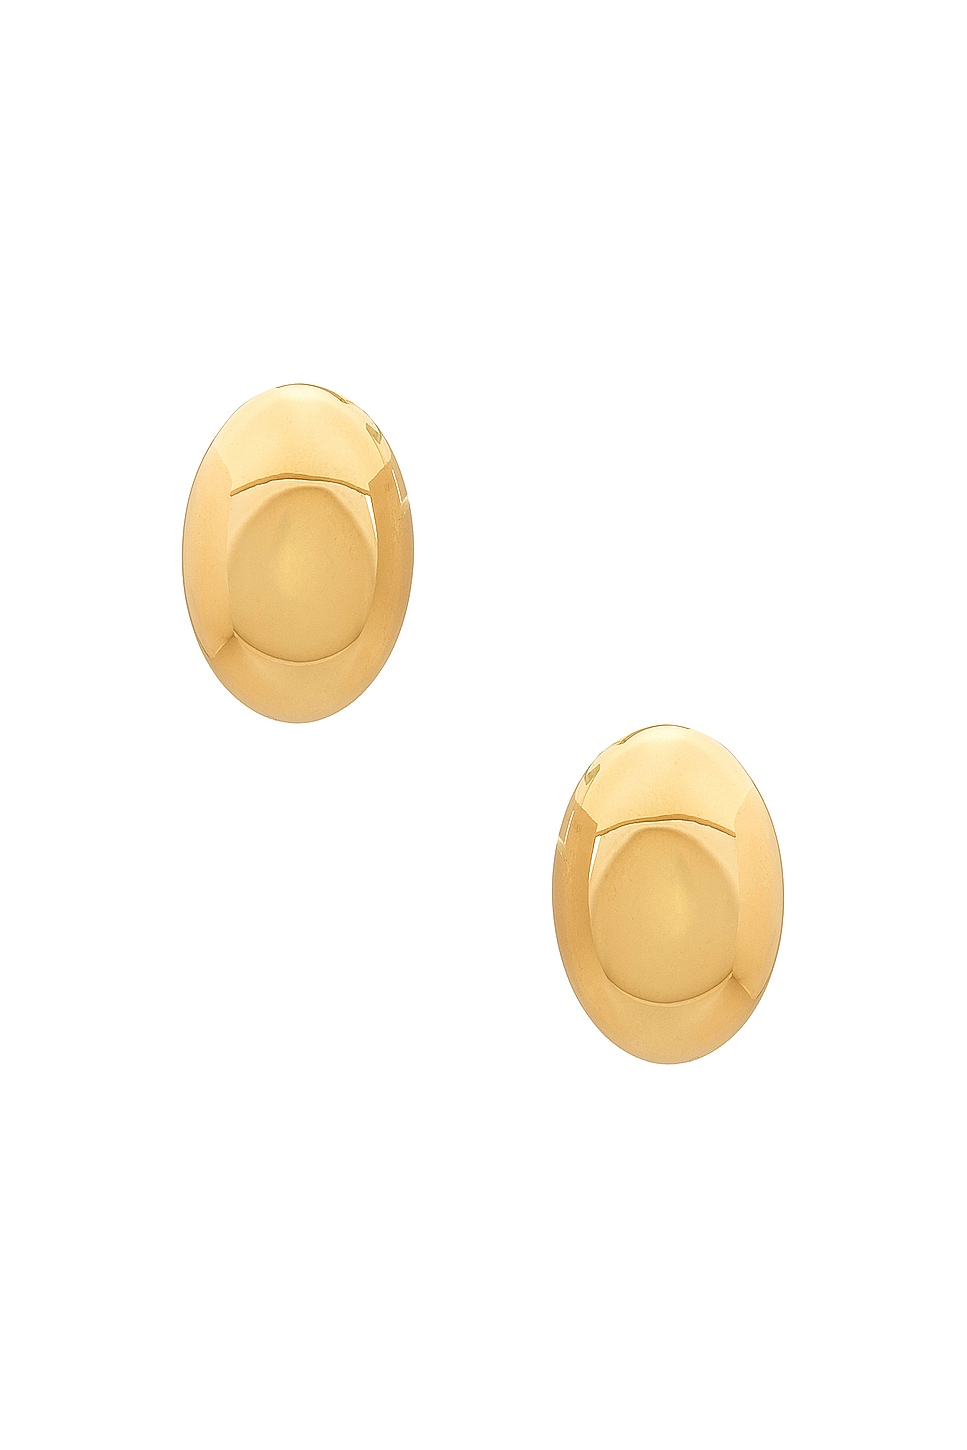 Image 1 of Lie Studio The Camille Earring in 18k Gold Plated